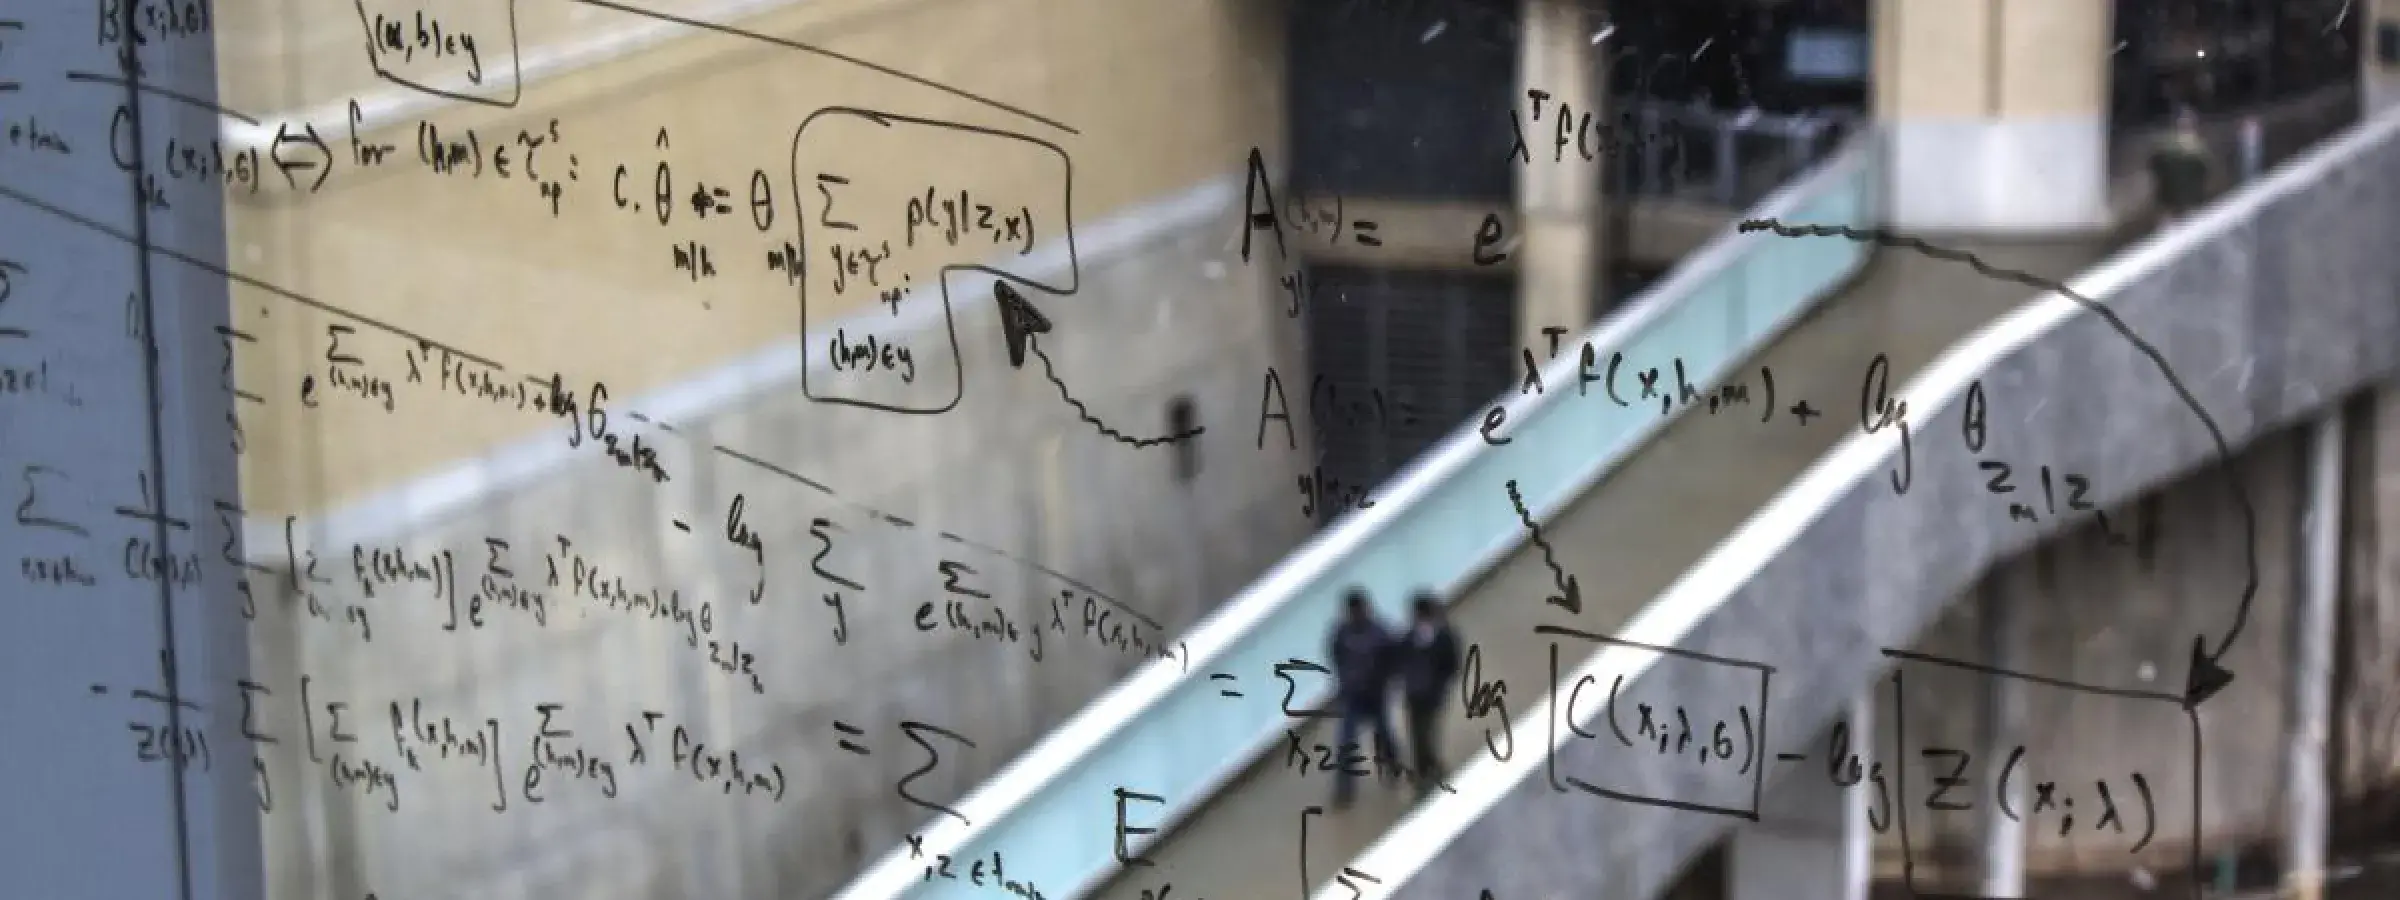 View of Carnegie Mellon Pausch bridge through window with algorithm written in marker on the glass